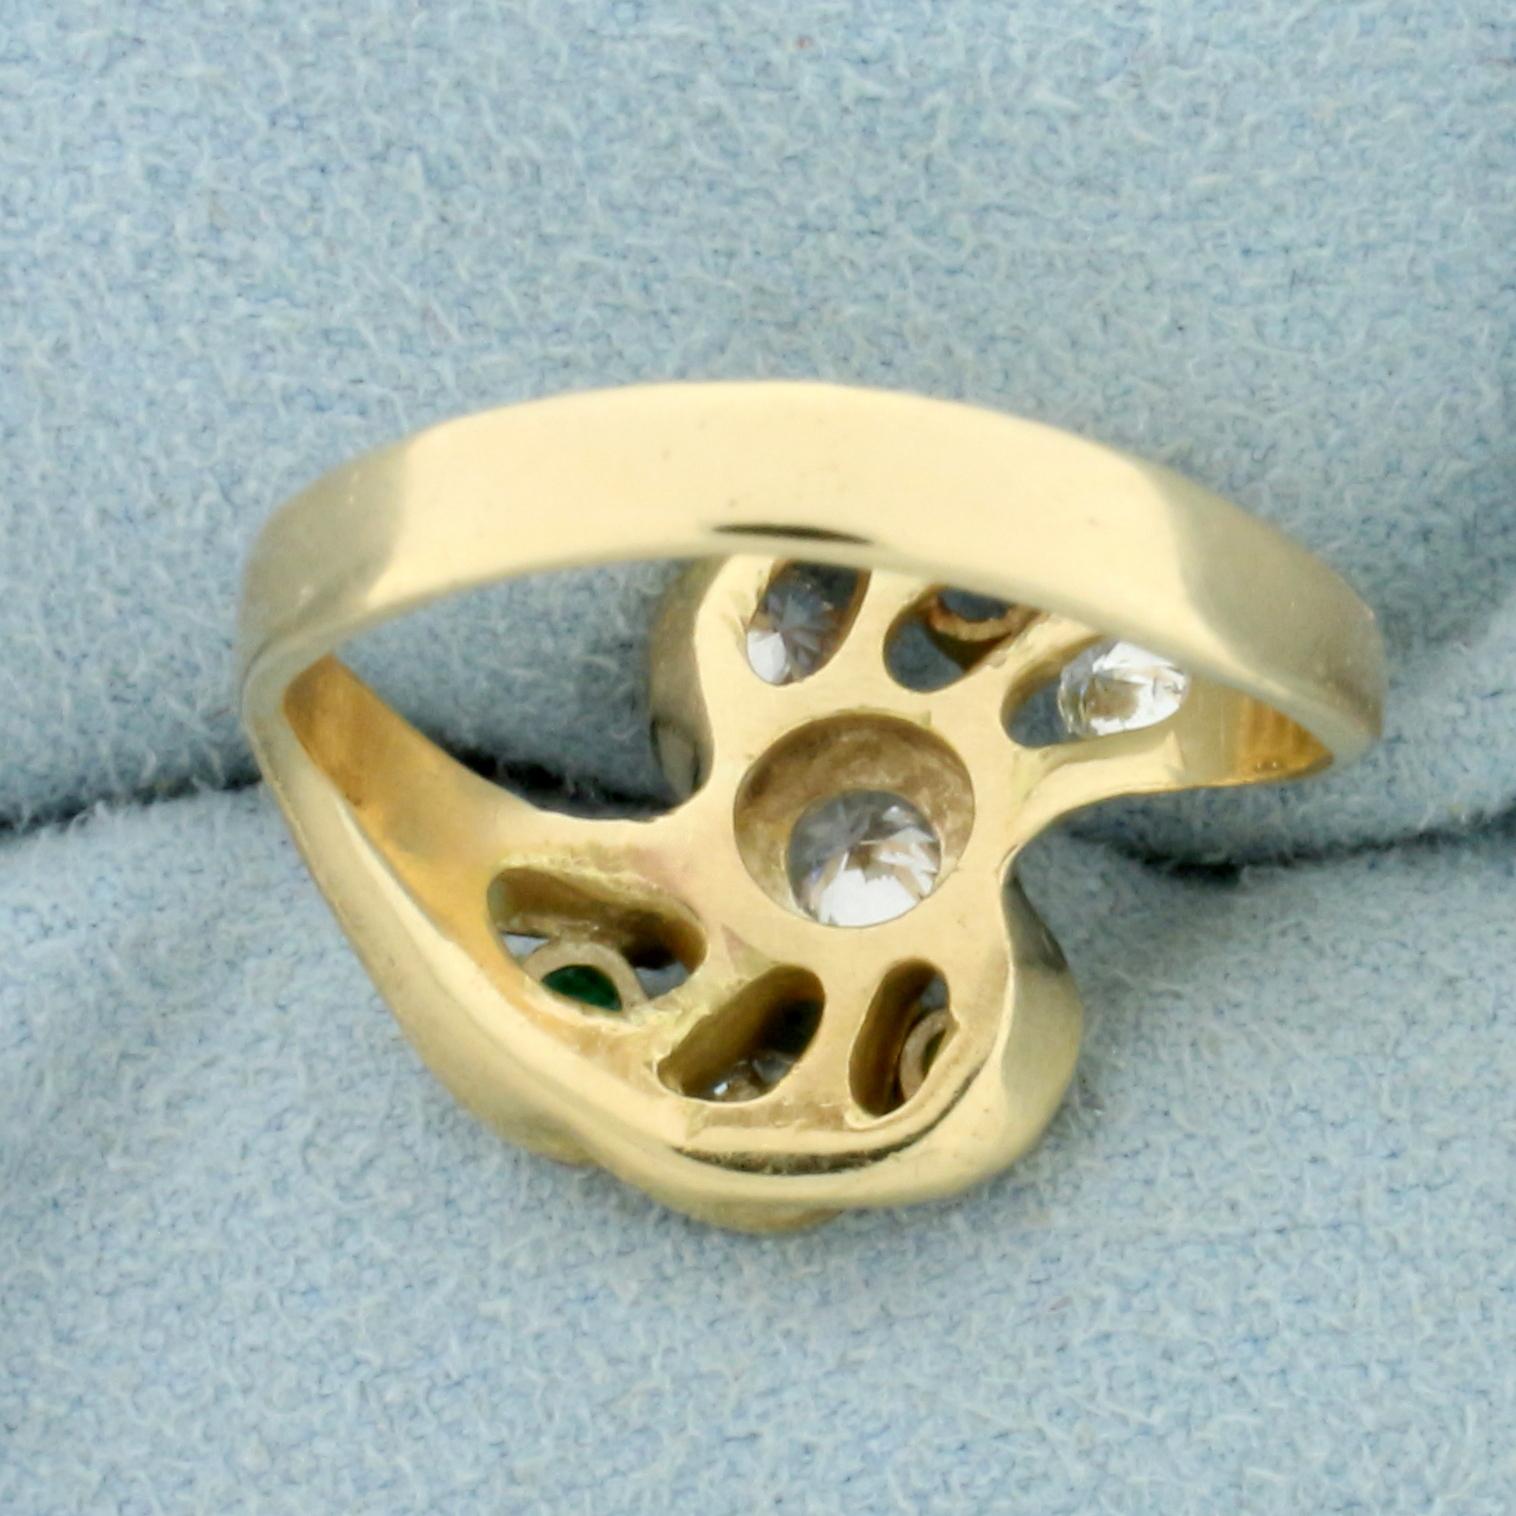 Vintage Diamond And Gemstone Ring In 14k Yellow Gold